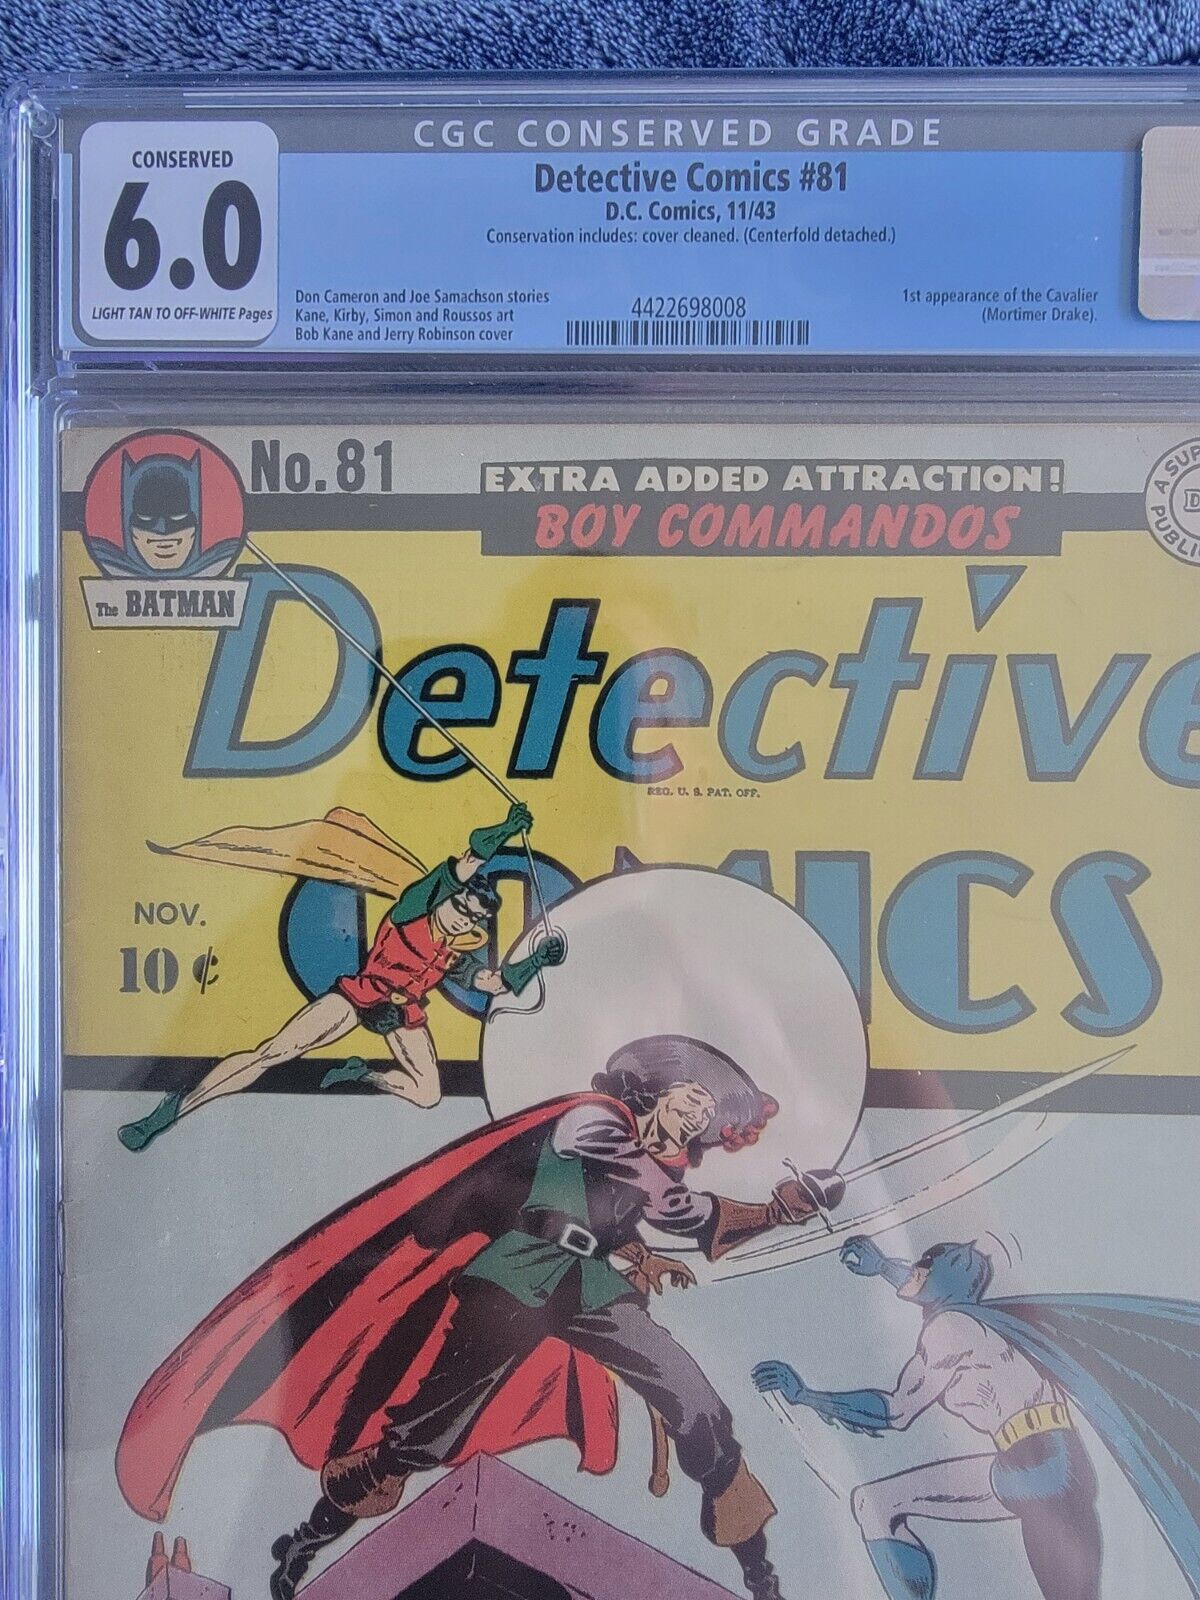 Detective Comics 81 1943 CONSERVED (Cover Cleaned-Detached Center Fold)